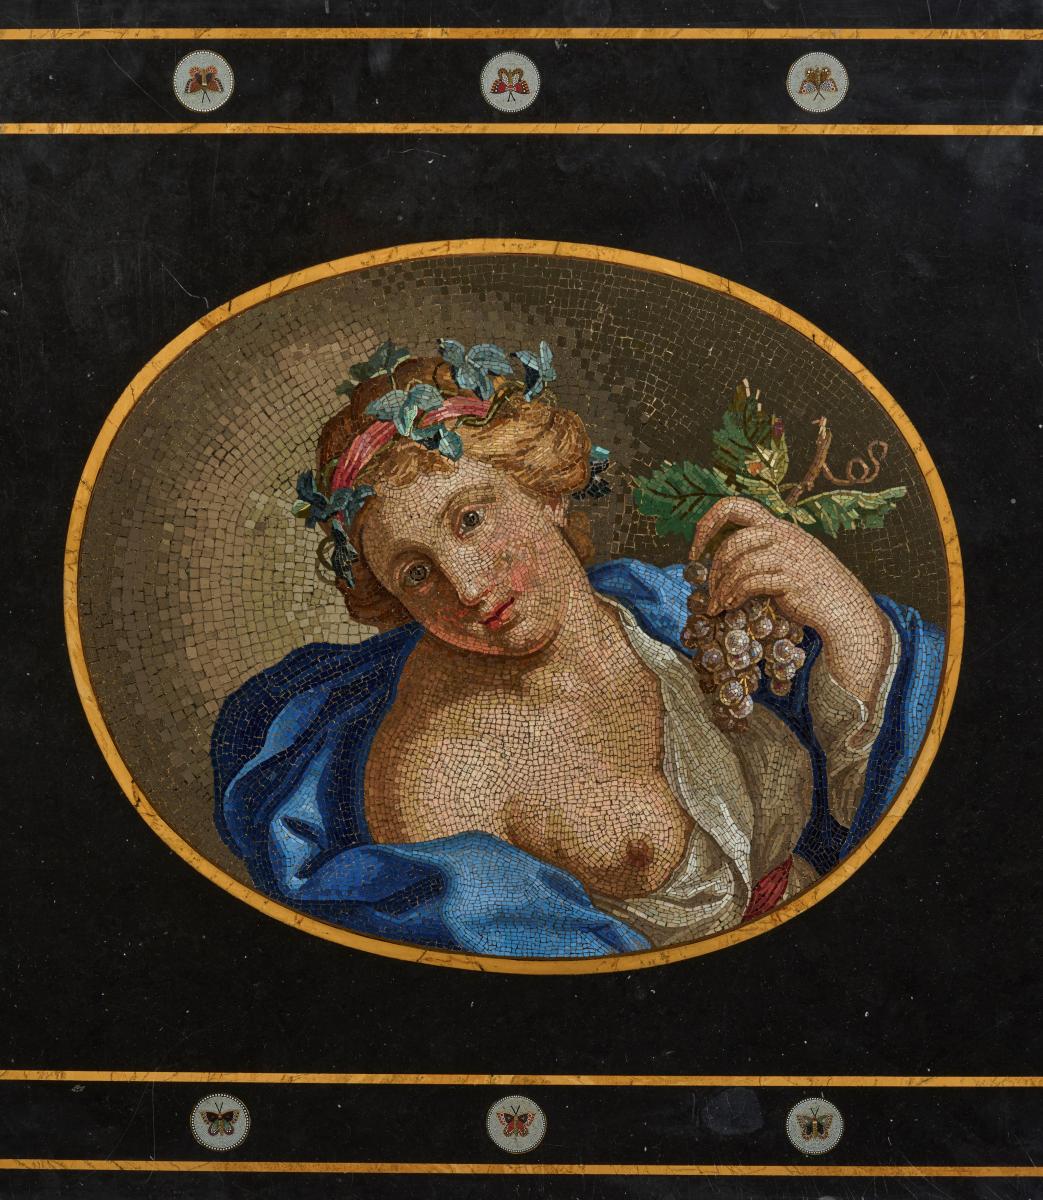 Attributed to Andrea Volpini (Rome doc. 1756-1812) and Giacomo Raffaelli (Rome 1753-1836) - Marble Panel centred with a Mosaic Depicting a Bacchante and surrounded by micromosaic medallions of Butterflies